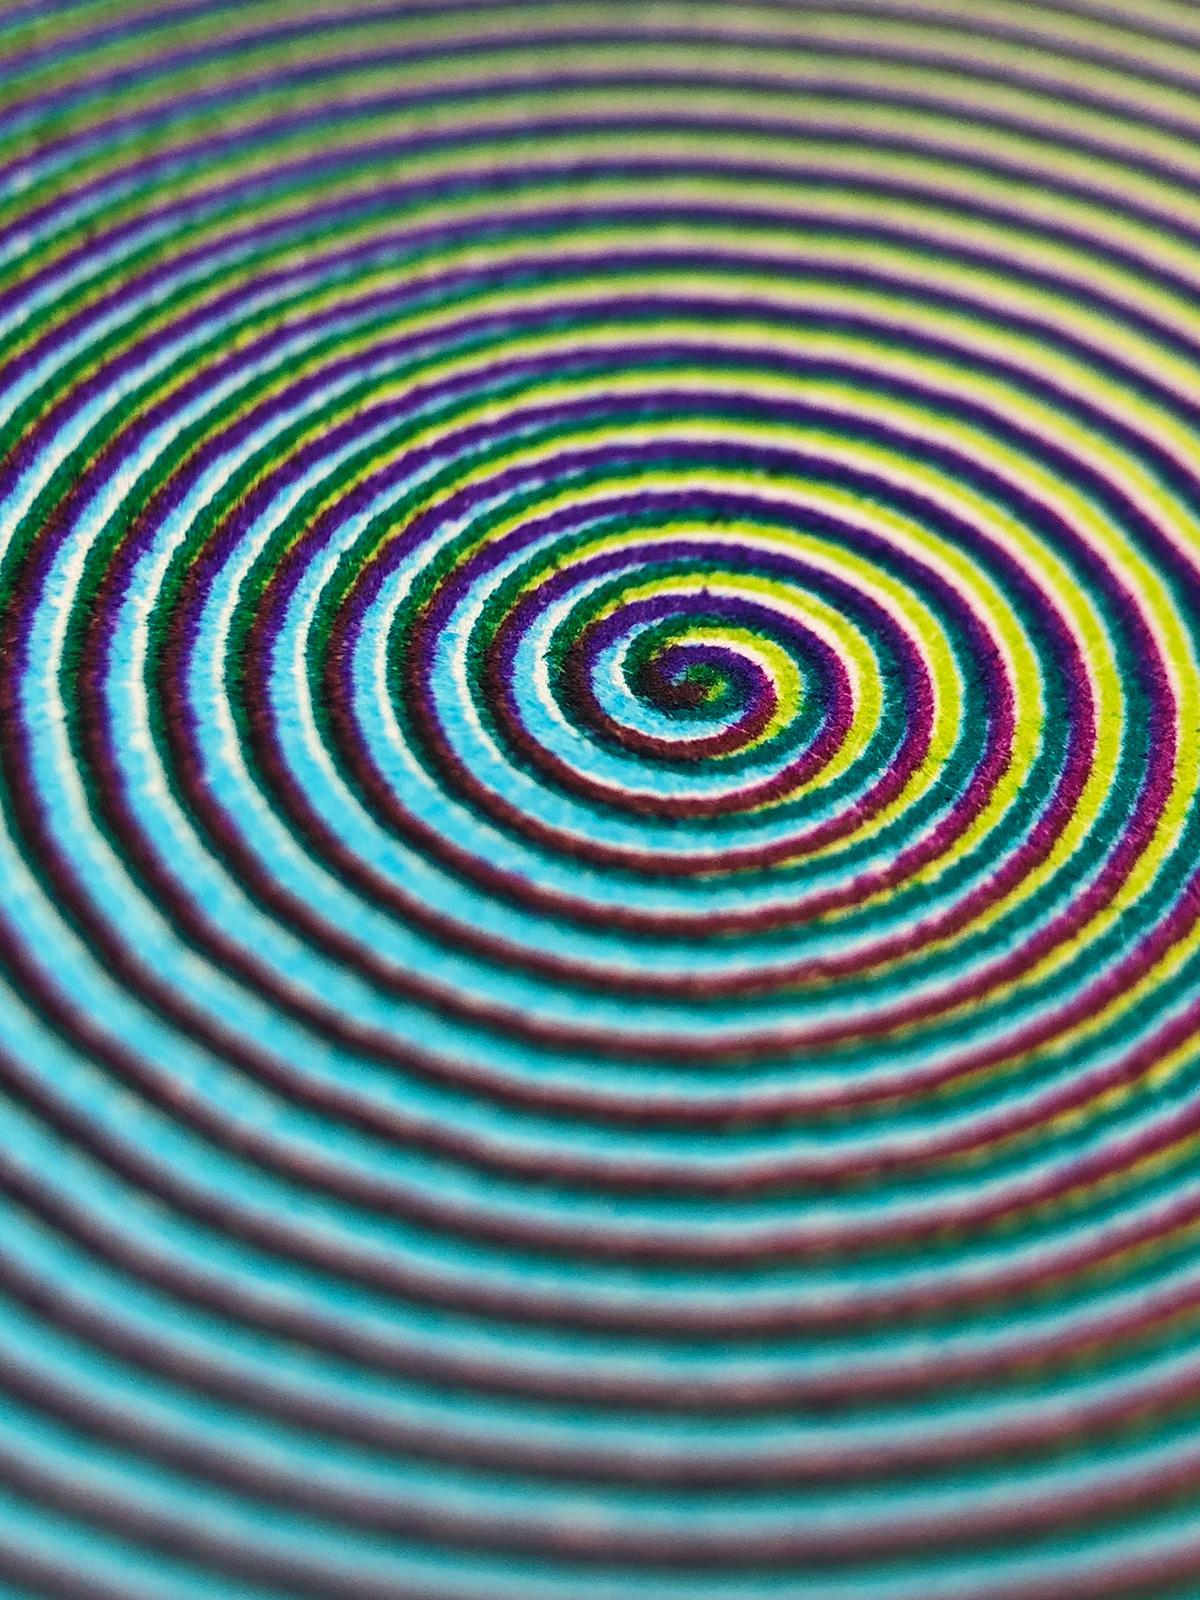 The same close-up view of a second spiral, made up of shades of green, blue, and lilac